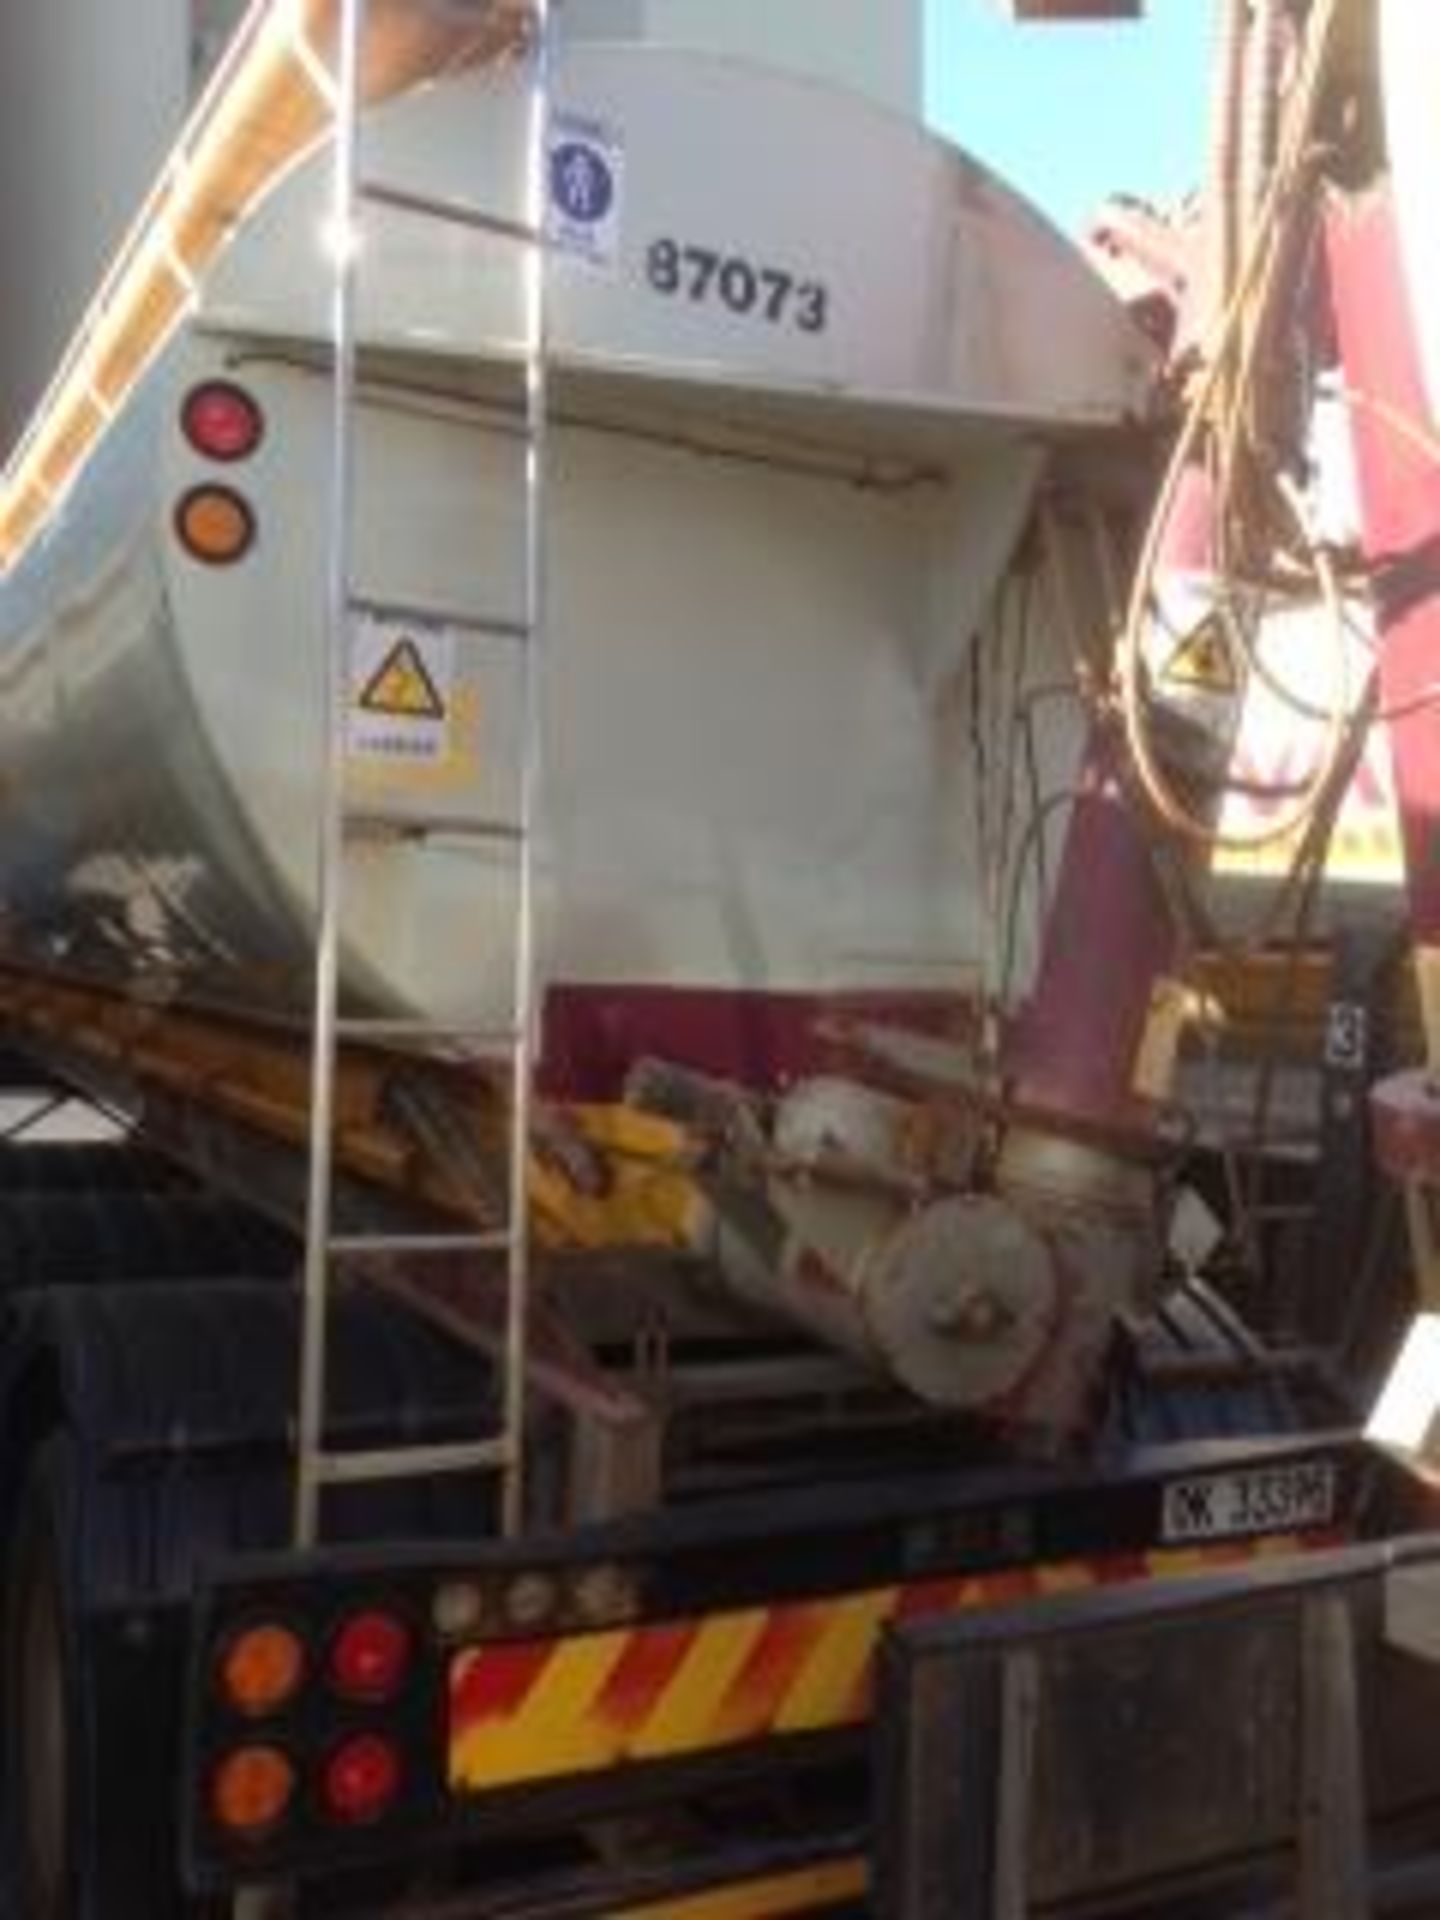 2008 AUGER TRI-AXLE AUGER BULK TANKER TRAILER CK3375 - Subject to Confirmation - Image 2 of 9